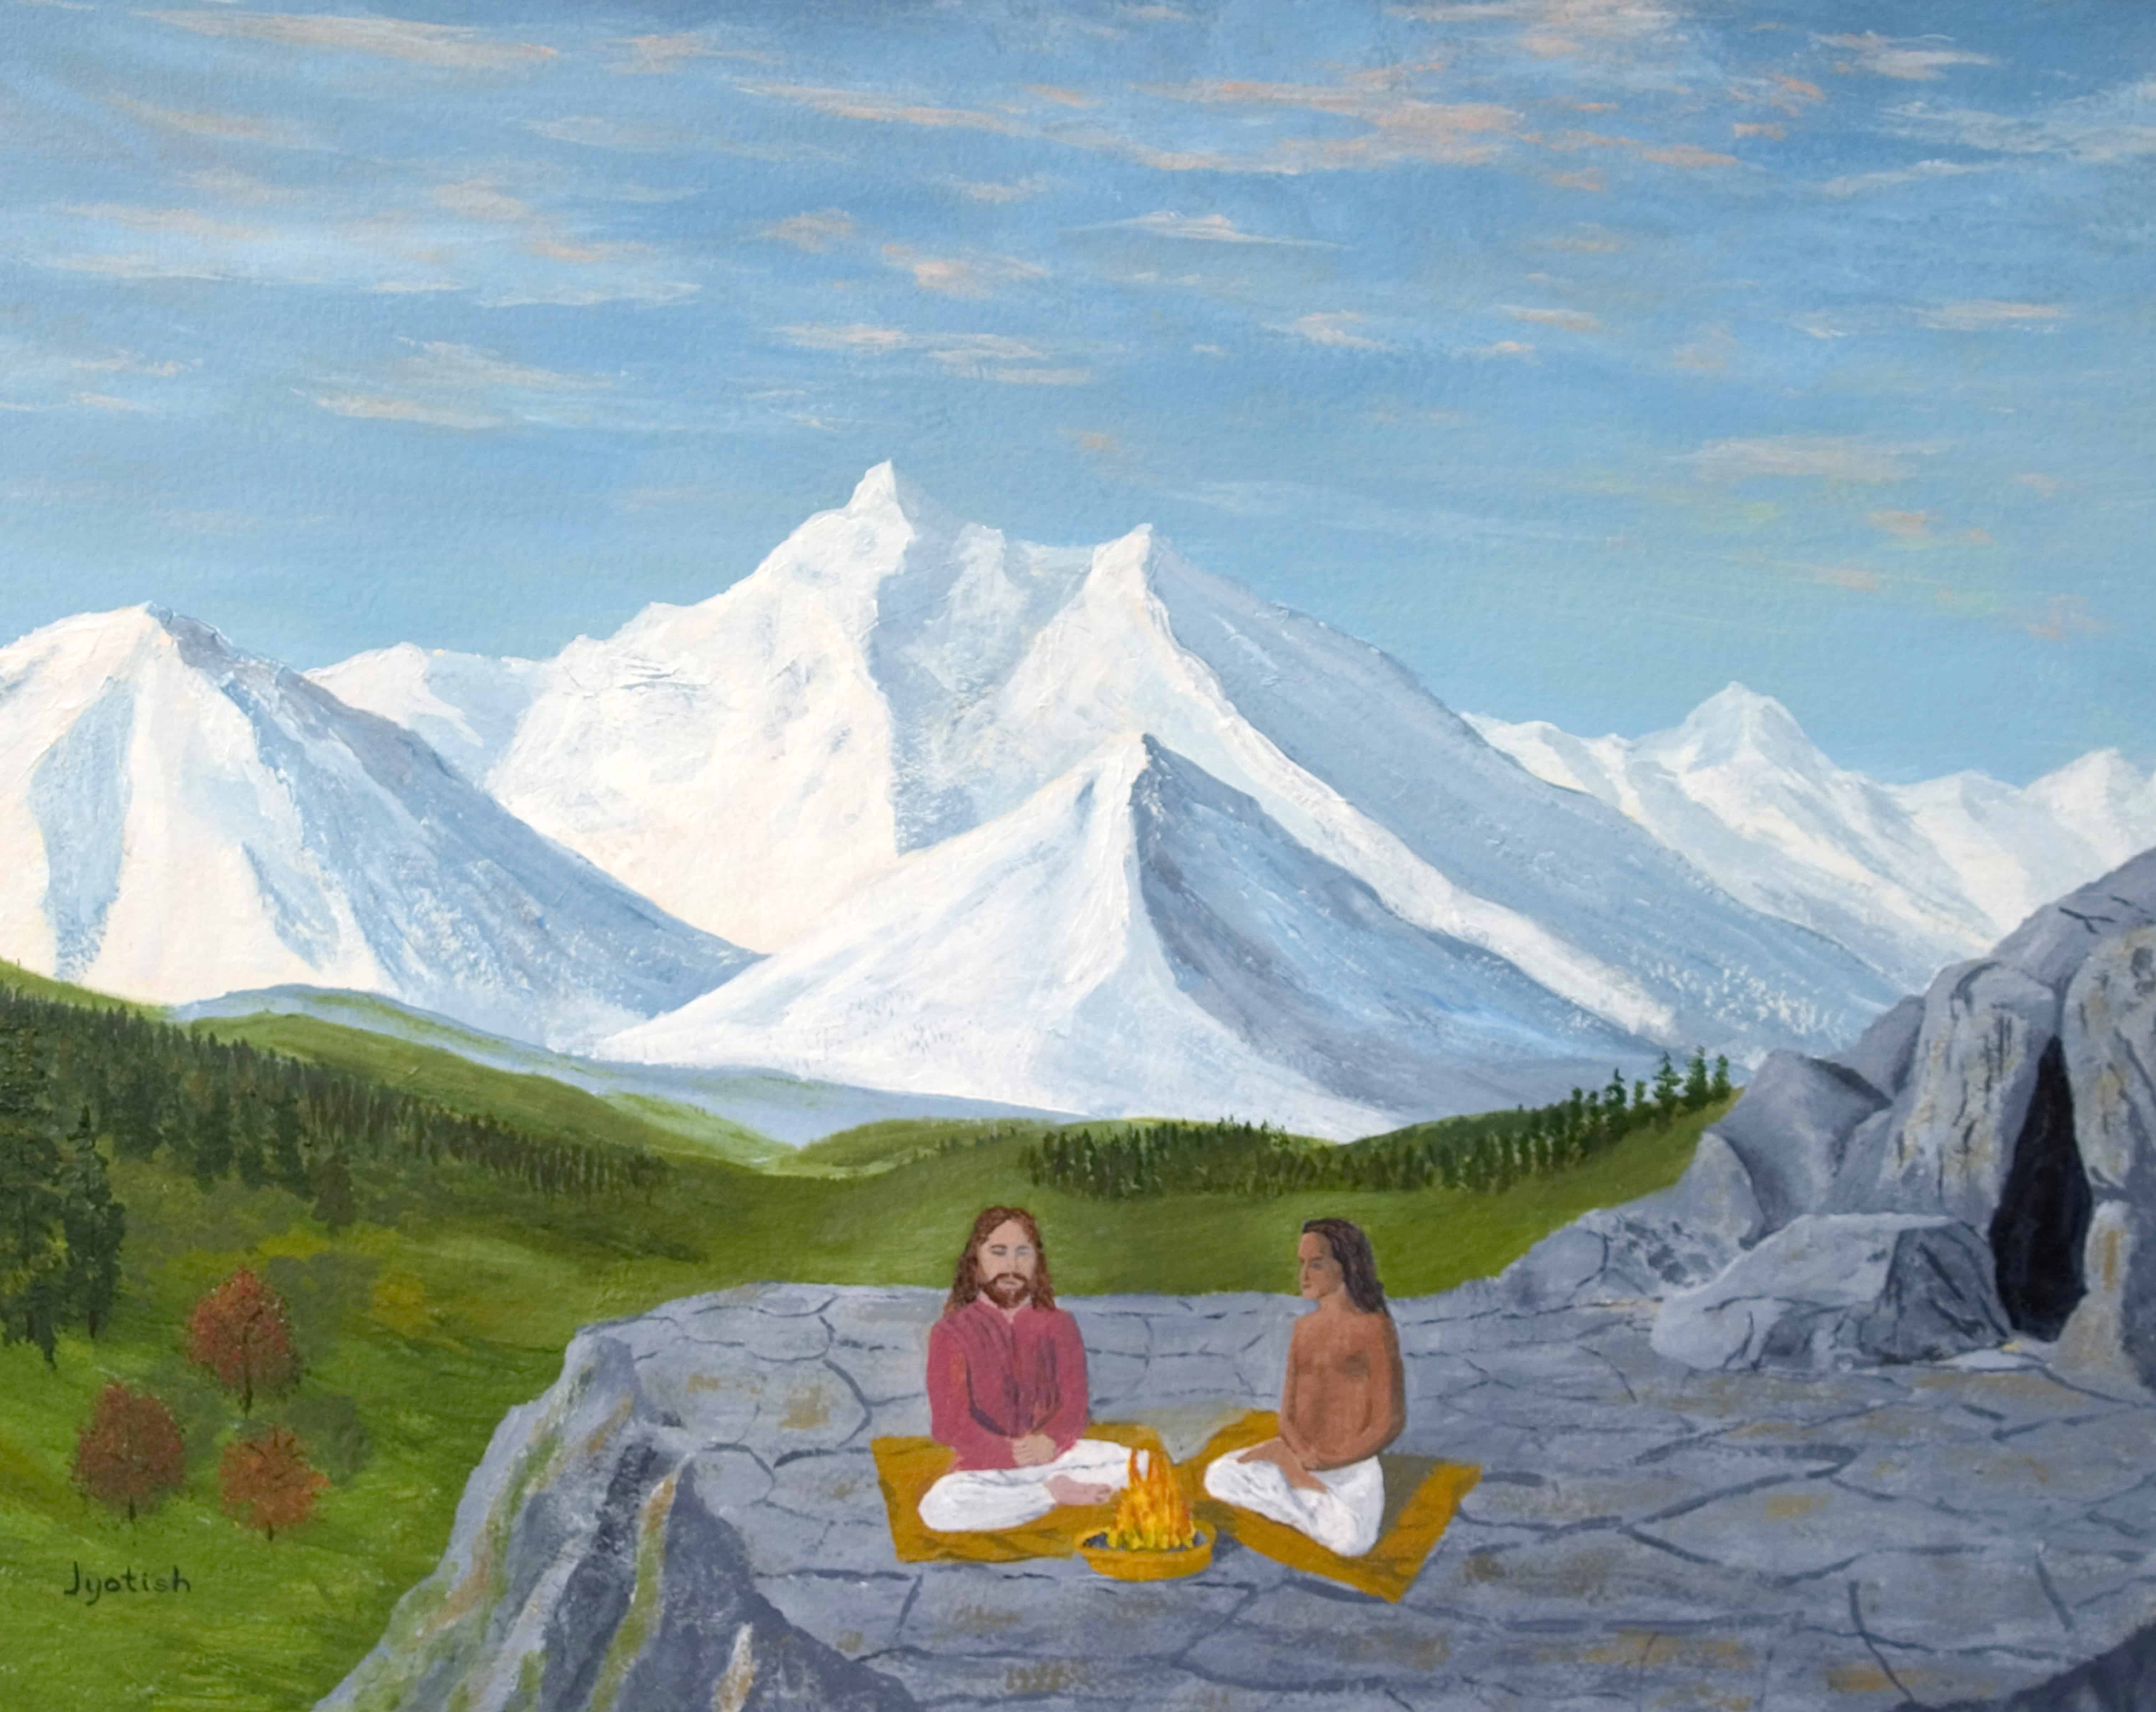 guiding principles of ananda jyotish painting of babaji and christ and mission to share east and west original teachings of god